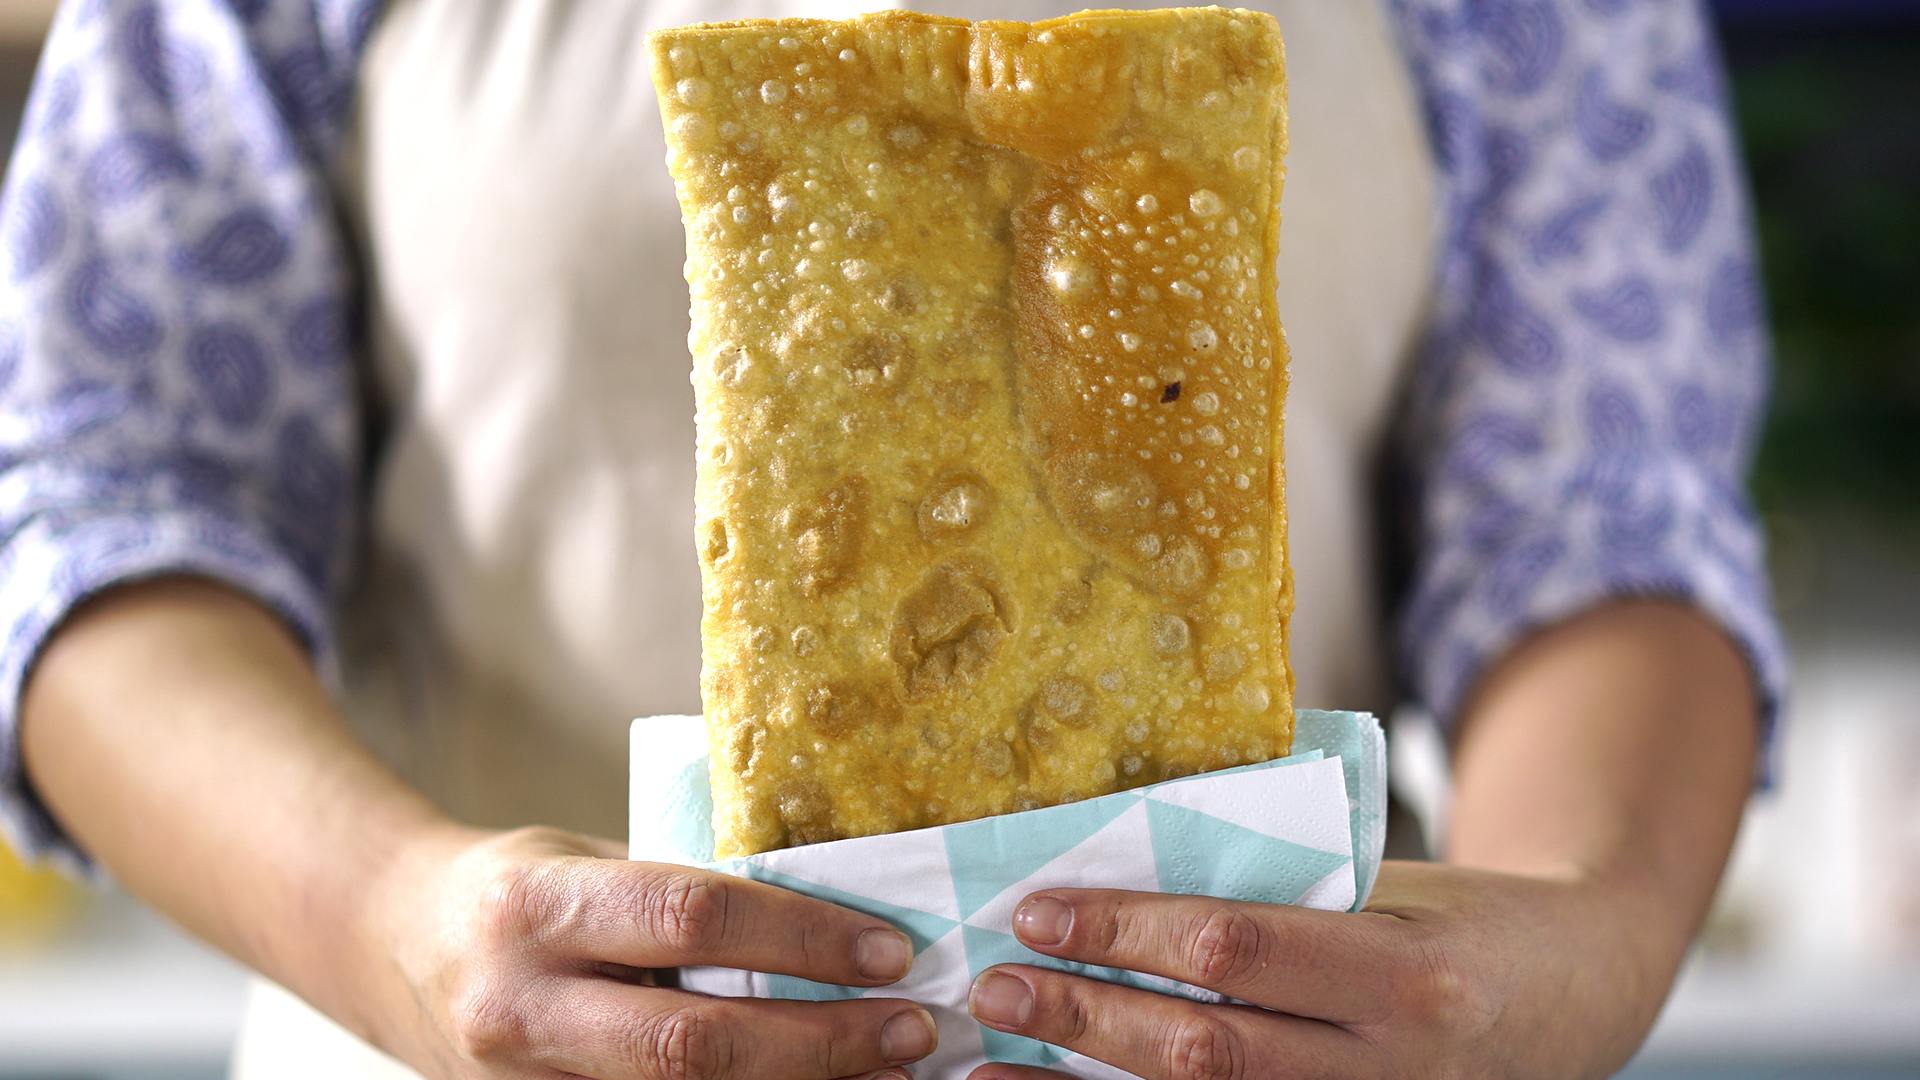 A fried bread a bit smaller than an A4 sheet of paper, held by a woman in cooking attire.